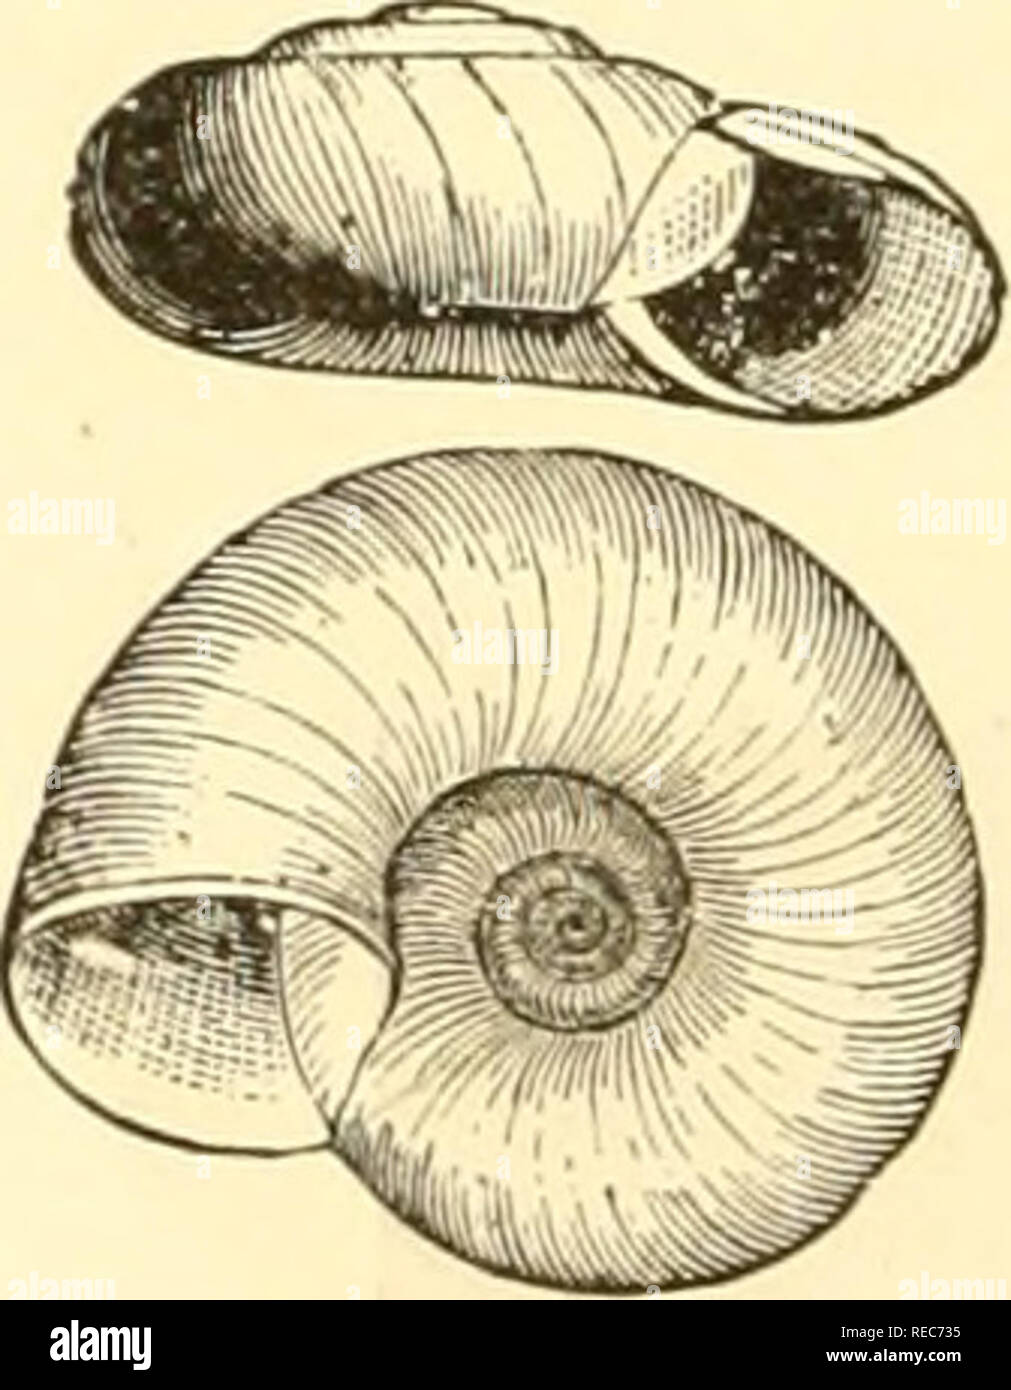 . Conchologia cestrica. The molluscous animals and their shells, of Chester county, Pa. Mollusks. Shell moderate, thin, wide, umbilicate, depressed, striate, unicolored; whorls 4—5, the last wide, depressed, and deflected; aperture oblique, ovate; peristome slightly thickened, and reflected at base. M. concava, Say. Helix concava, Say, Jour. Phil. Acad. F. S., II., 1821. Shell convex-discoid, pale horn color, sometimes with a tinge of green; whorls 5, substriate, the last one flattened near the mouth, rounded, beneath; umbilicus wide, and deep; lip sub-reflexed, at base, and its extremities un Stock Photo